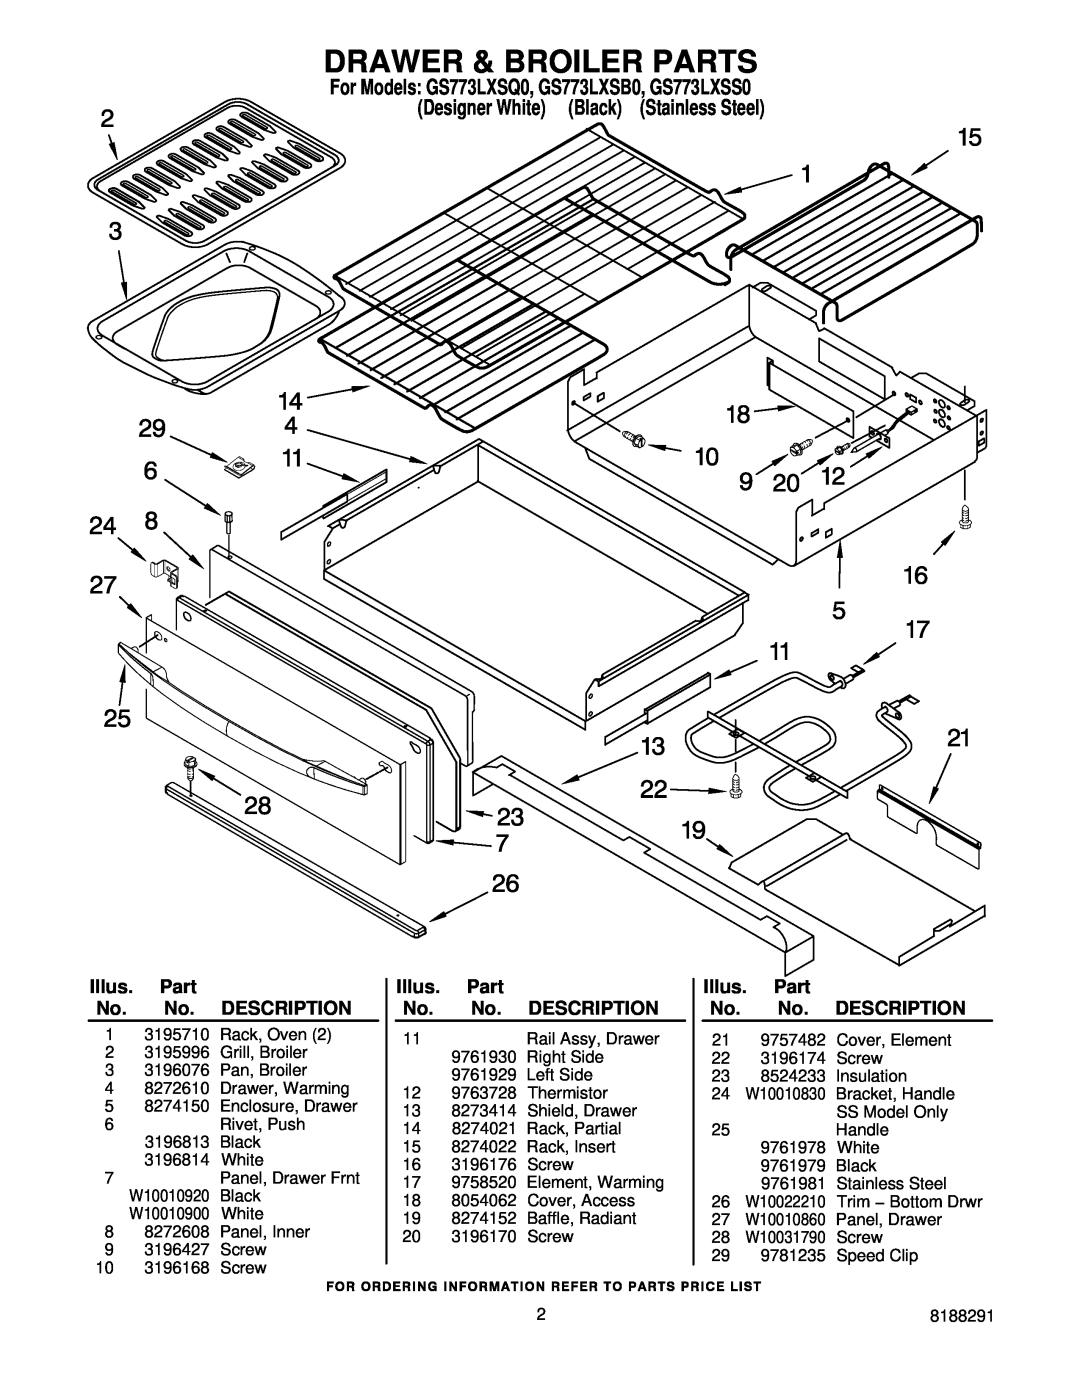 Whirlpool GS773LXSQ0, GS773LXSB0, GS773LXSS0 installation instructions Drawer & Broiler Parts 